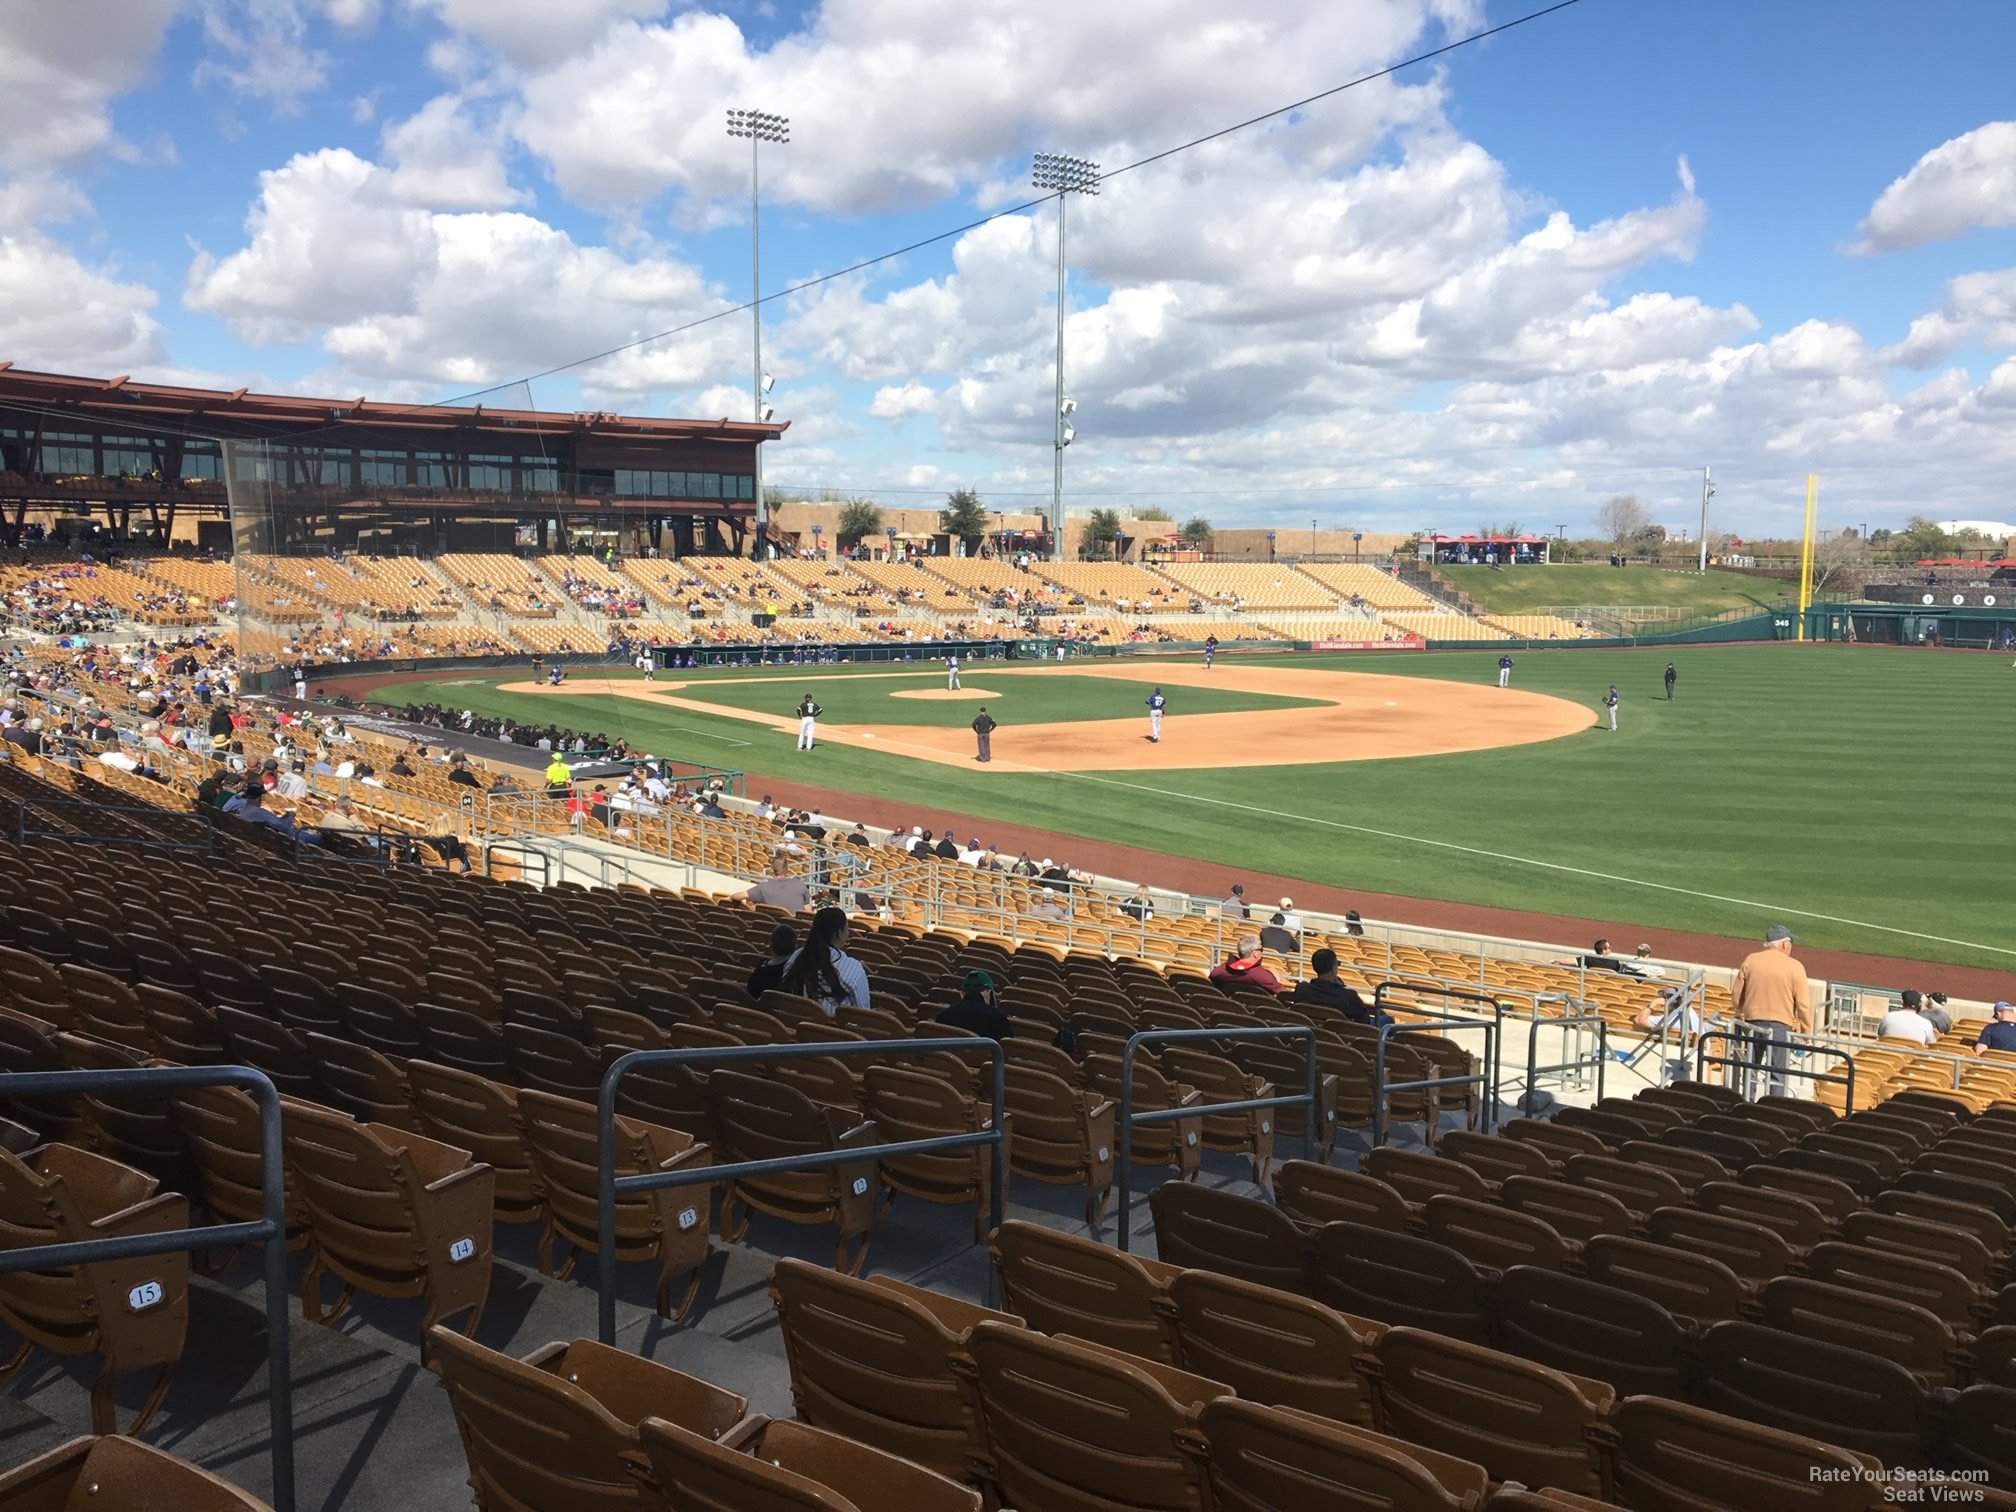 section 102, row 18 seat view  - camelback ranch